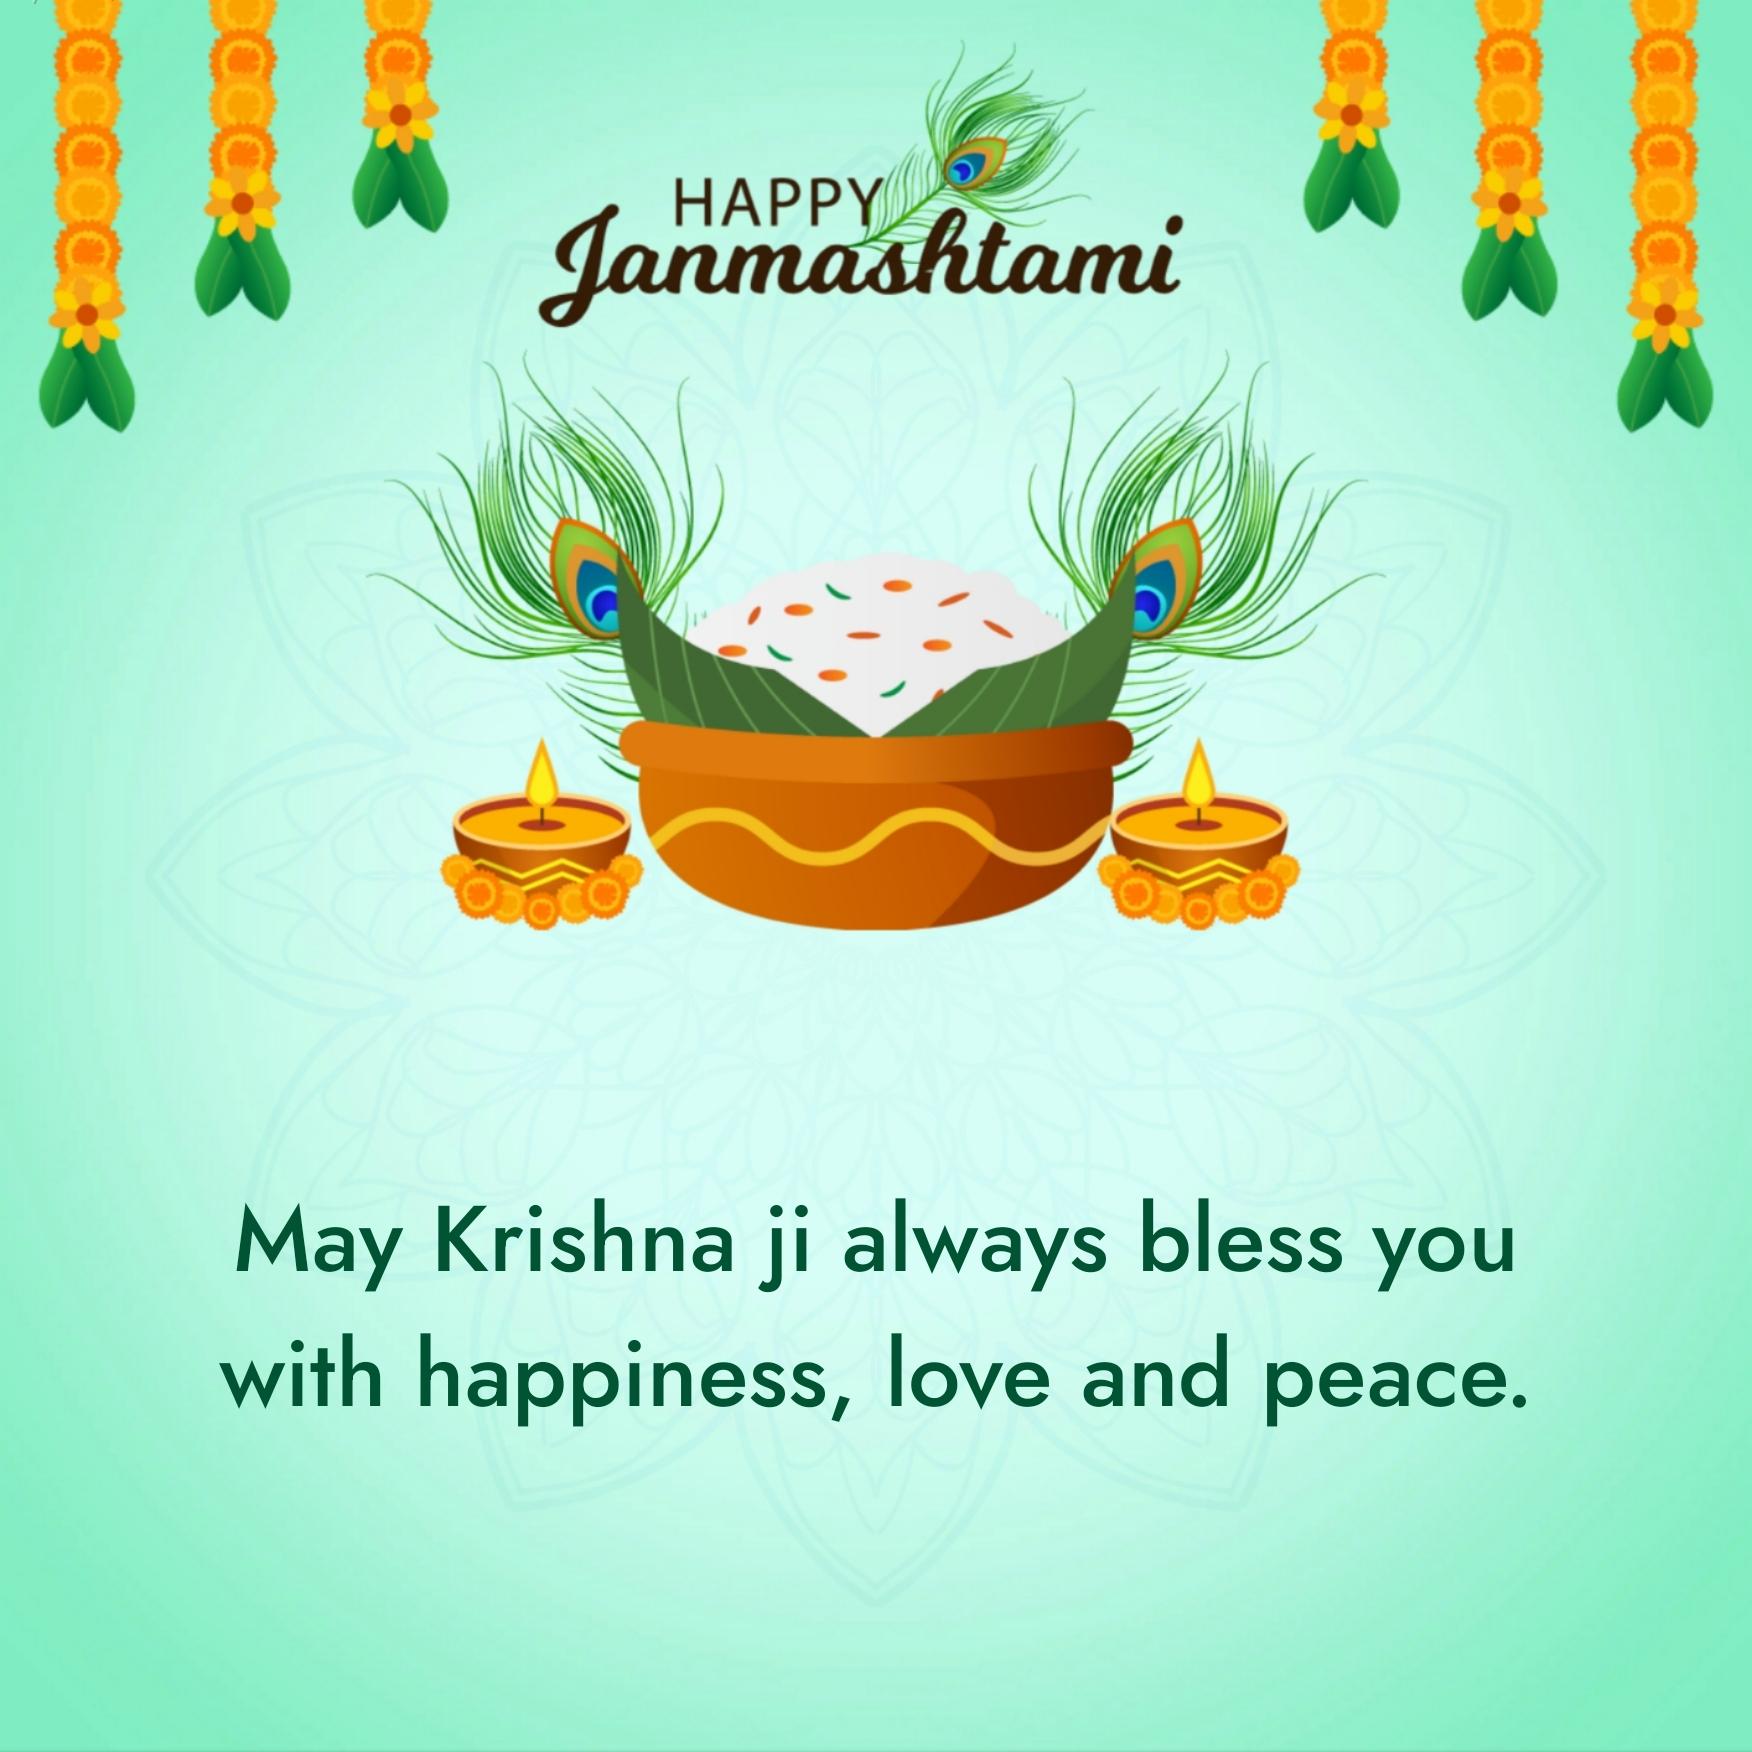 May Krishna ji always bless you with happiness